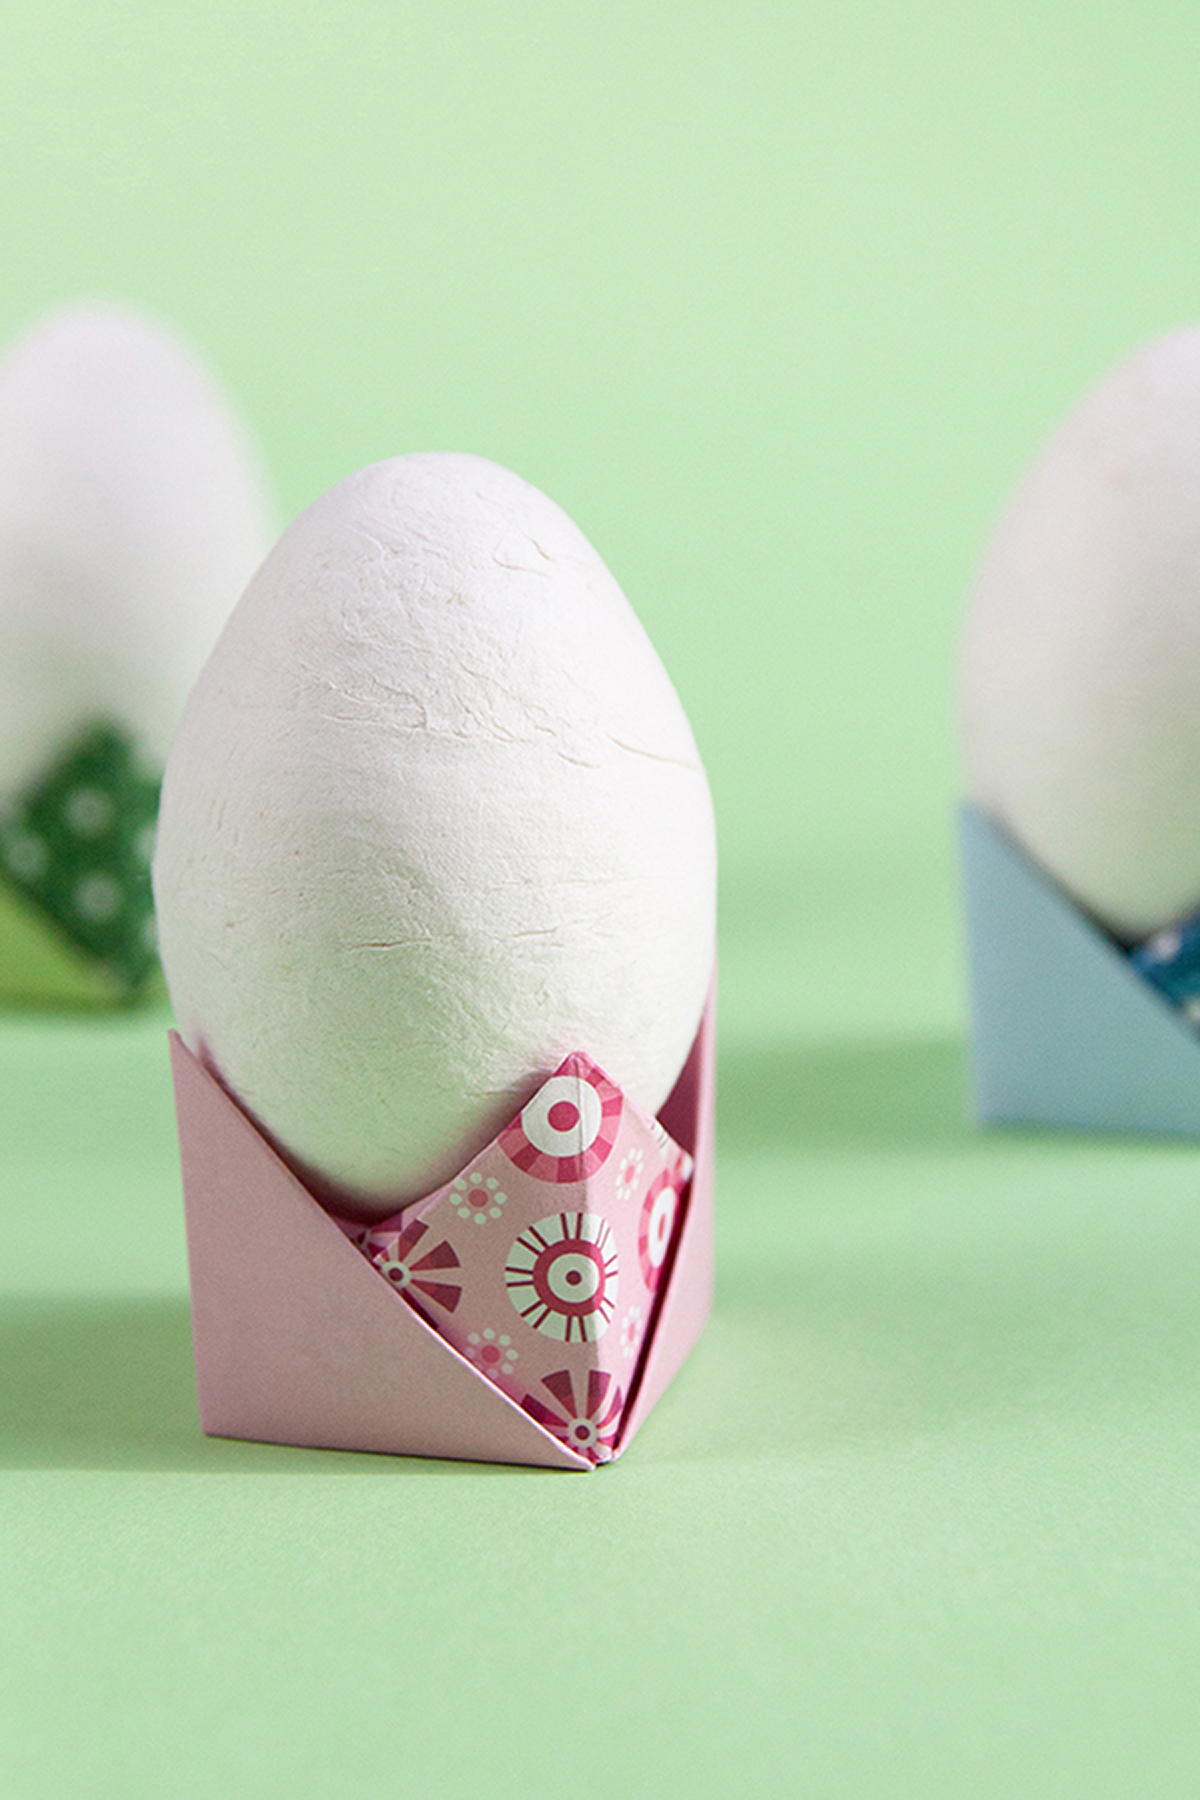 Origami Easter egg stand - DIY paper Easter egg holder with folding instructions - www.yeswemadethis.com